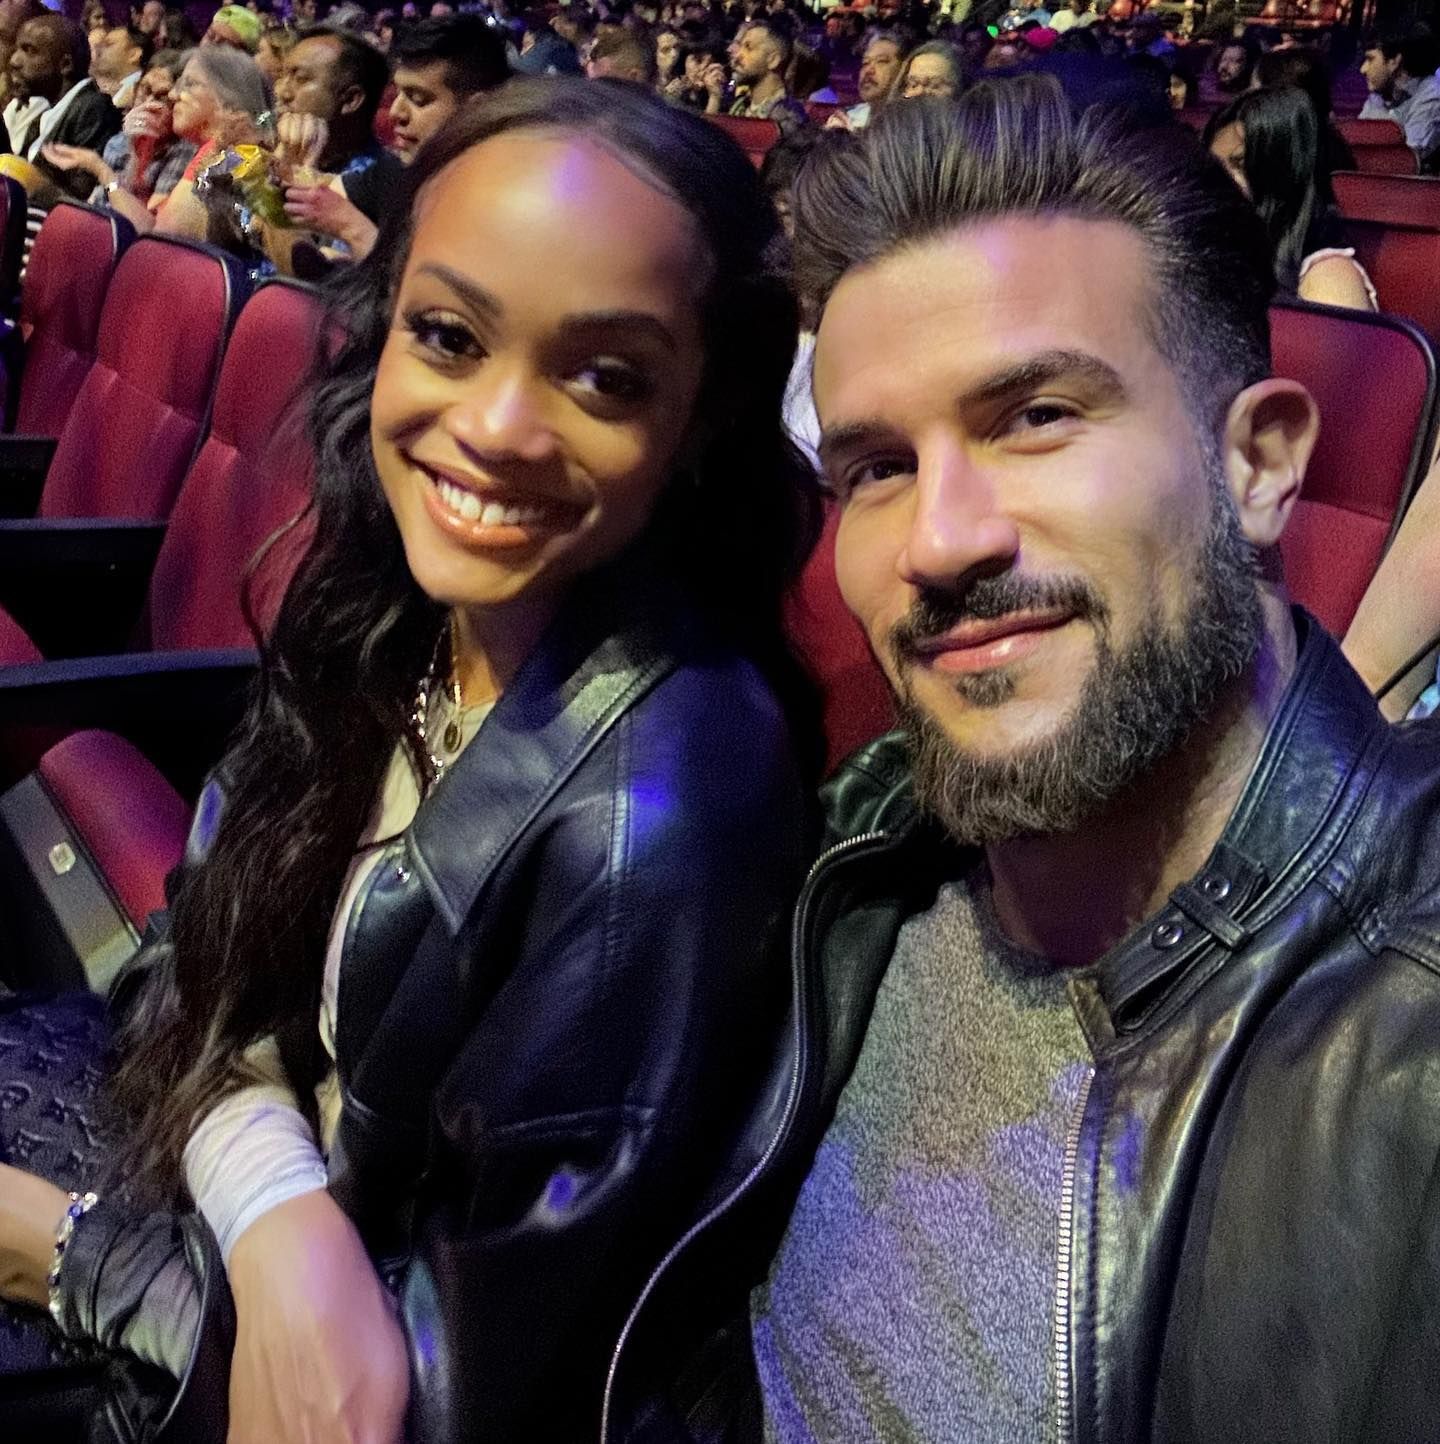 'Bachelor' Nation's Bryan Abasolo Files for Divorce From Rachel Lindsay After 4 Years of Marriage